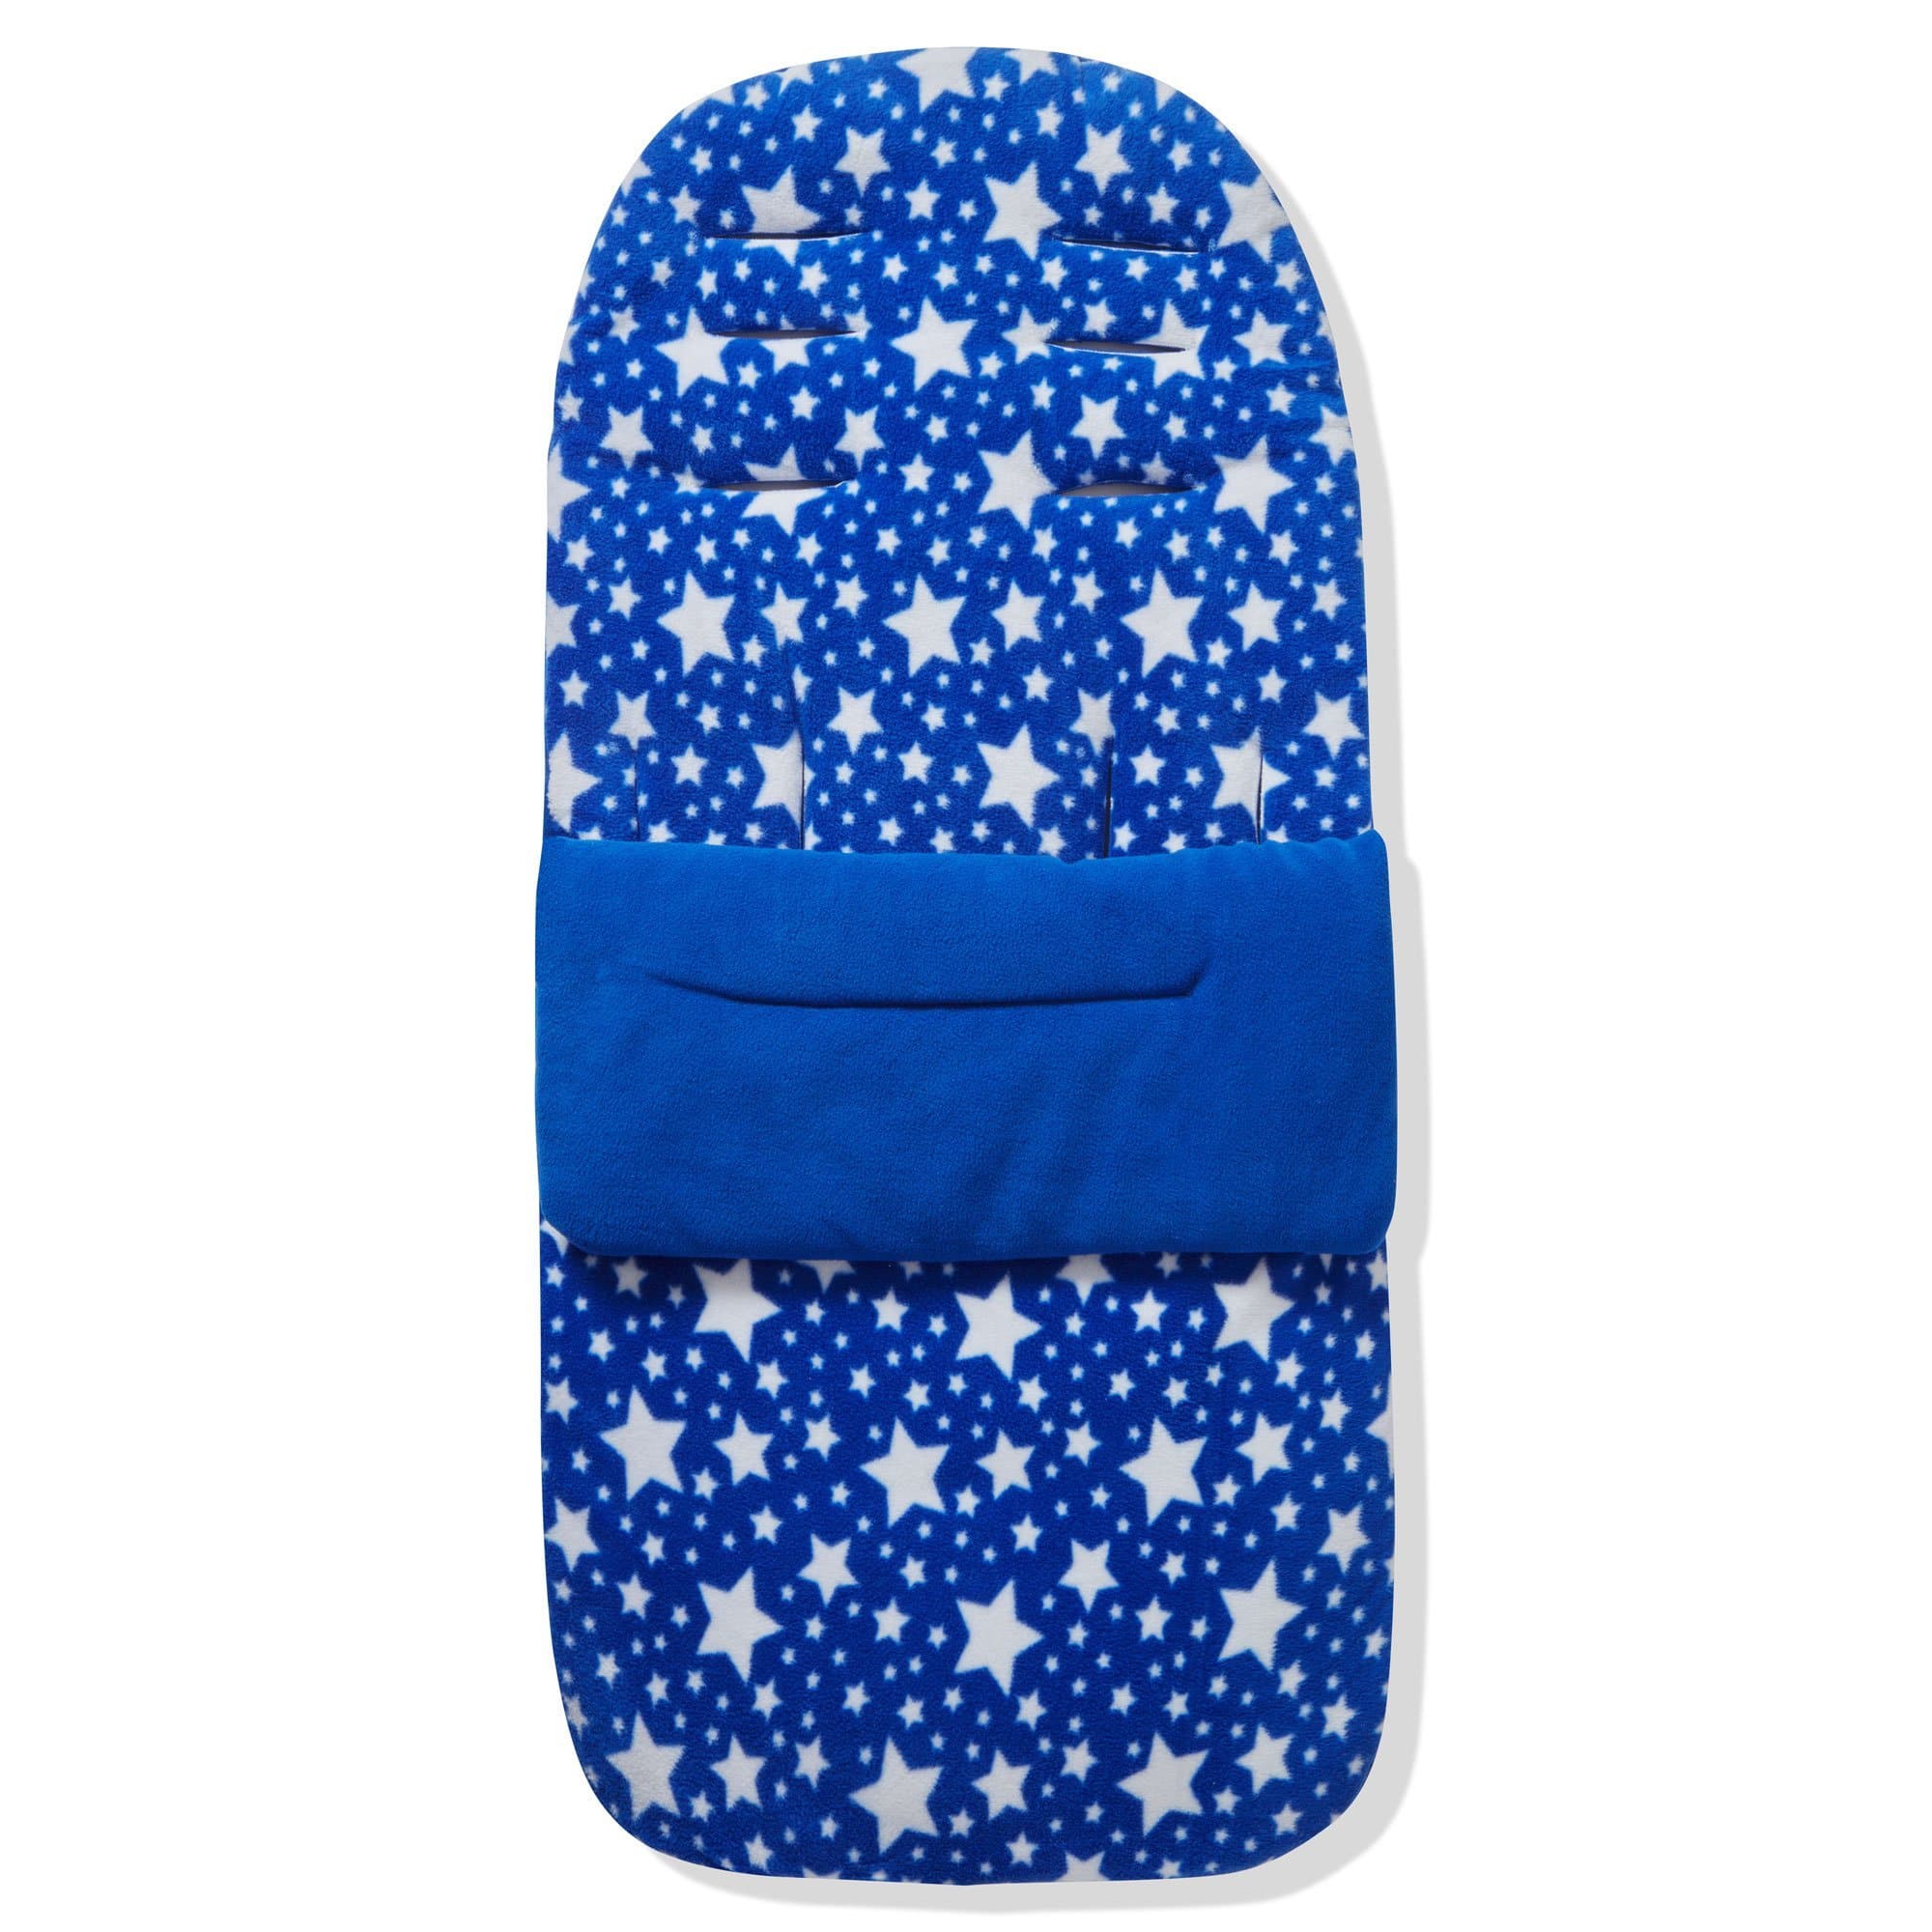 Fleece Footmuff / Cosy Toes Compatible with Joolz - Blue Star / Fits All Models | For Your Little One